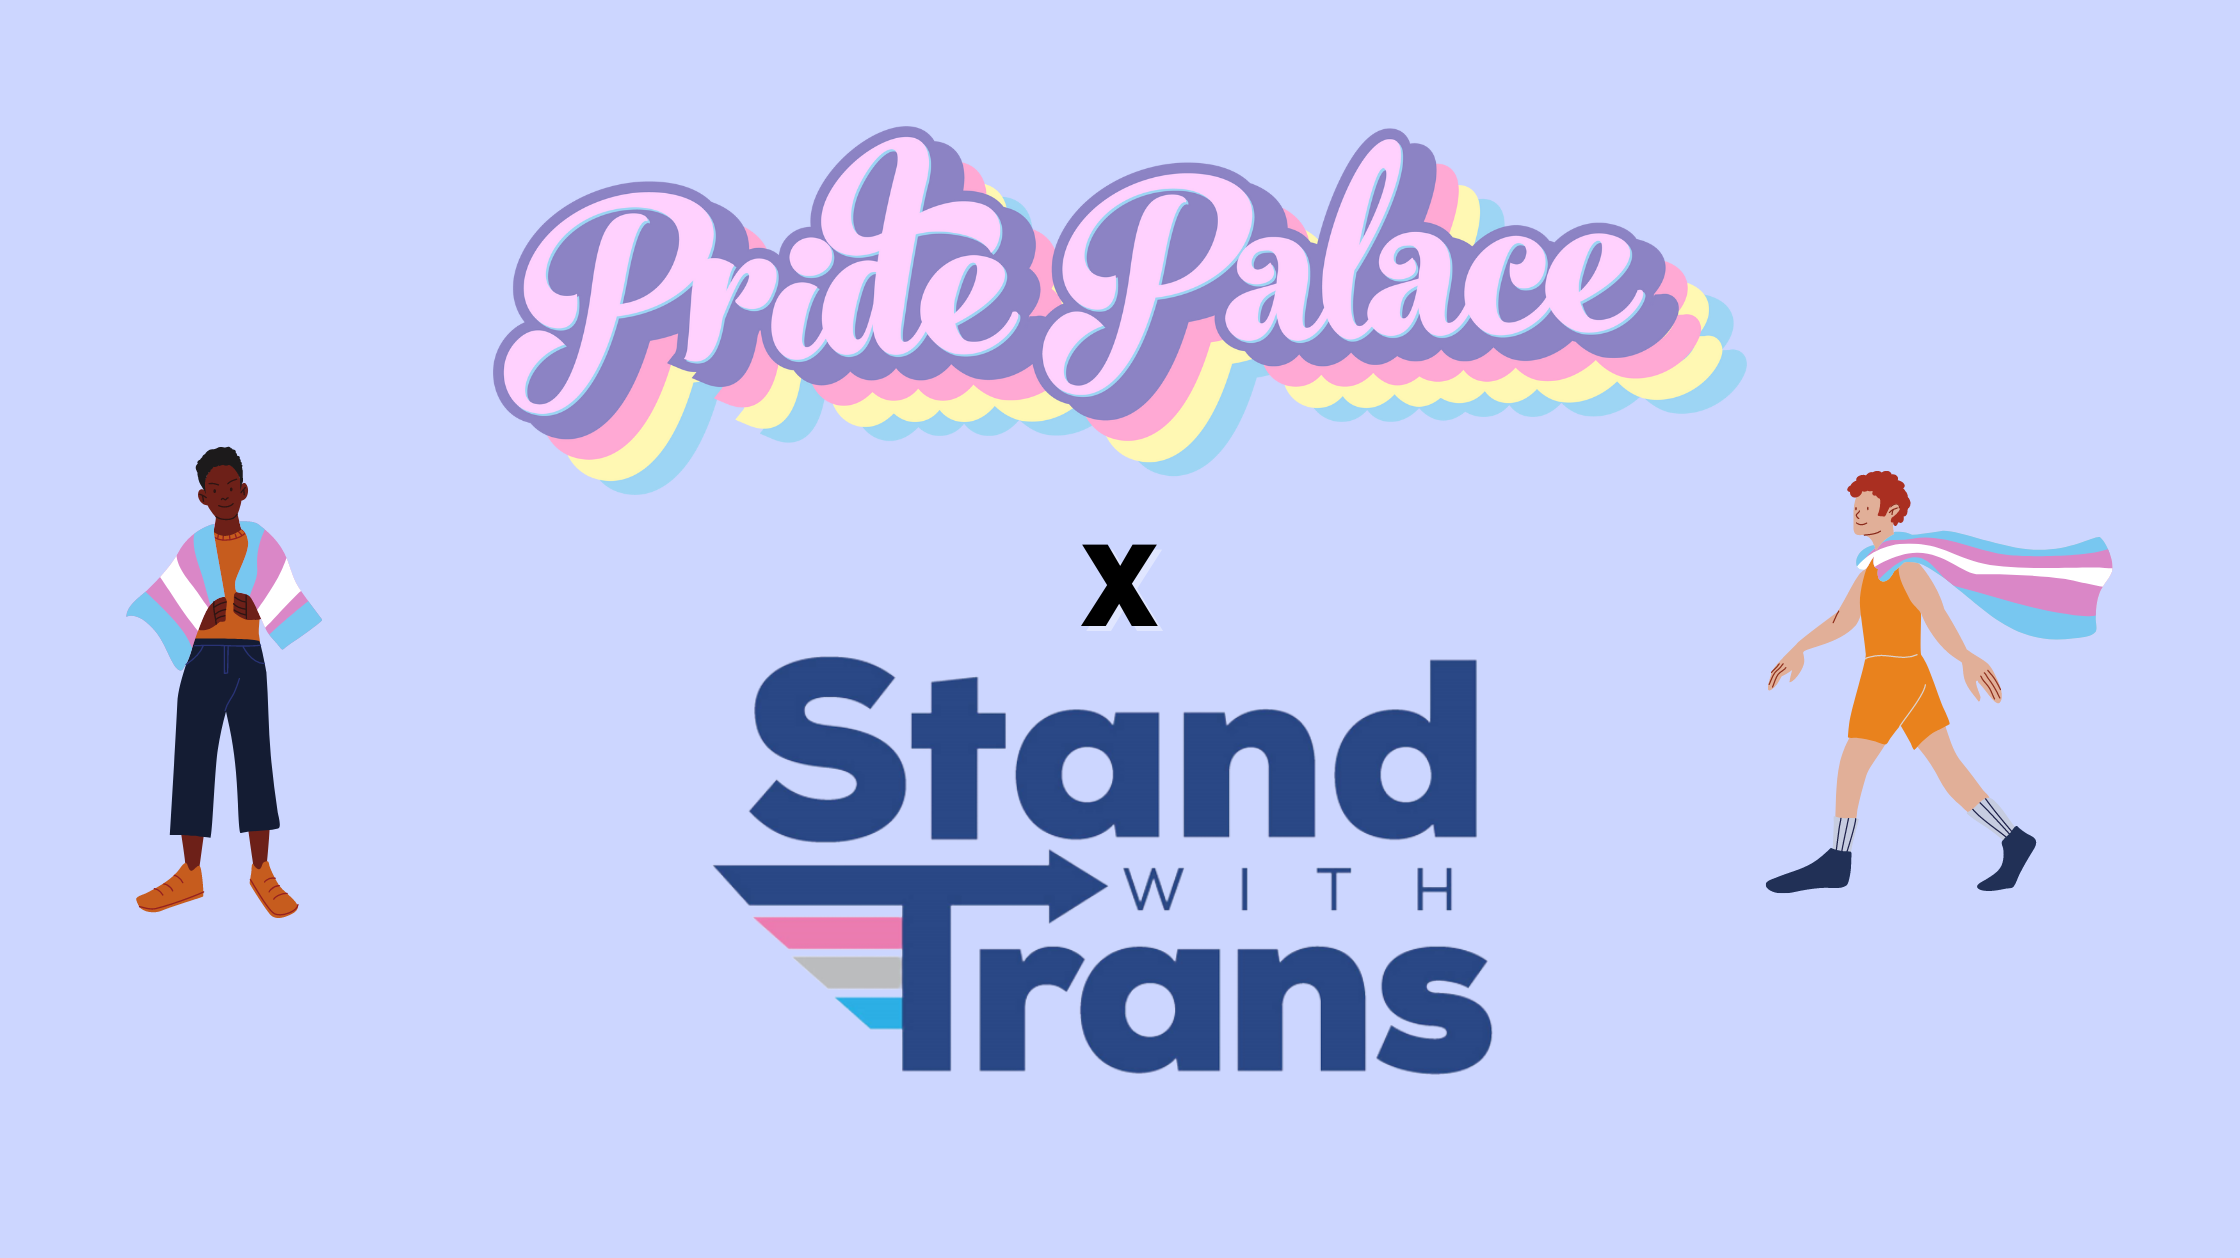 Pride Palace x Stand with Trans